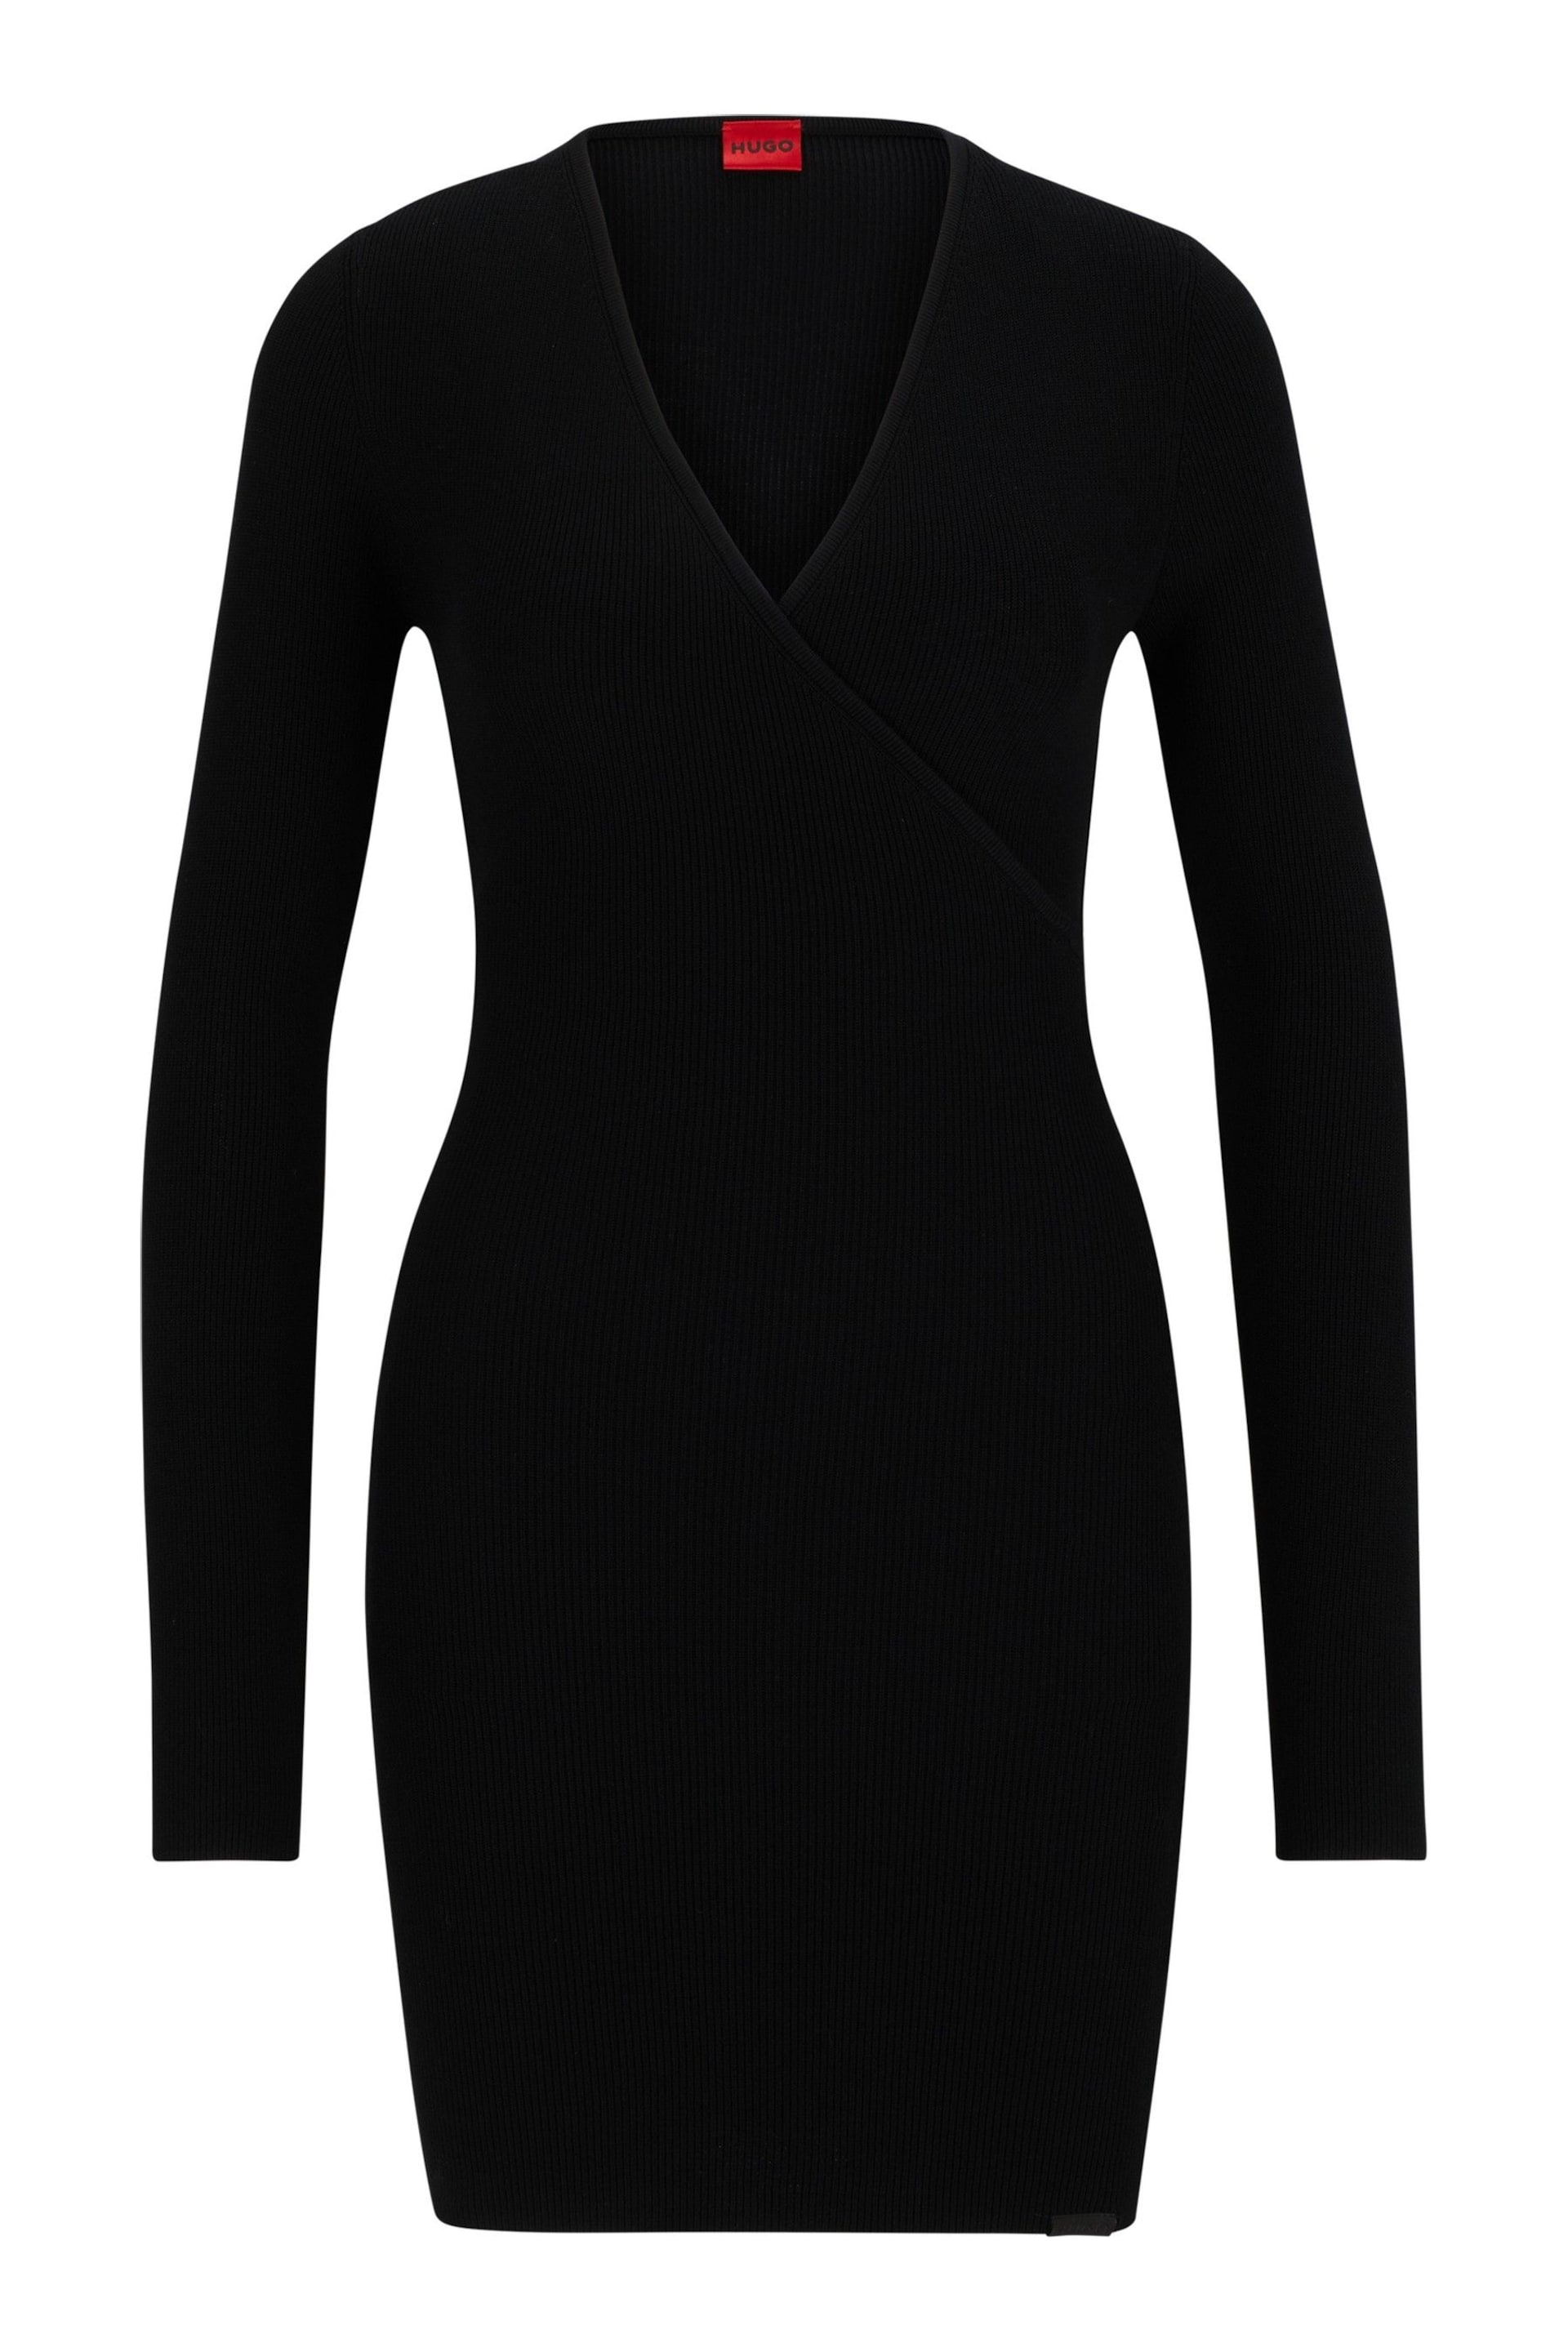 HUGO Black Cut Out Wrap Effect Fitted Mini Dress - Image 5 of 5